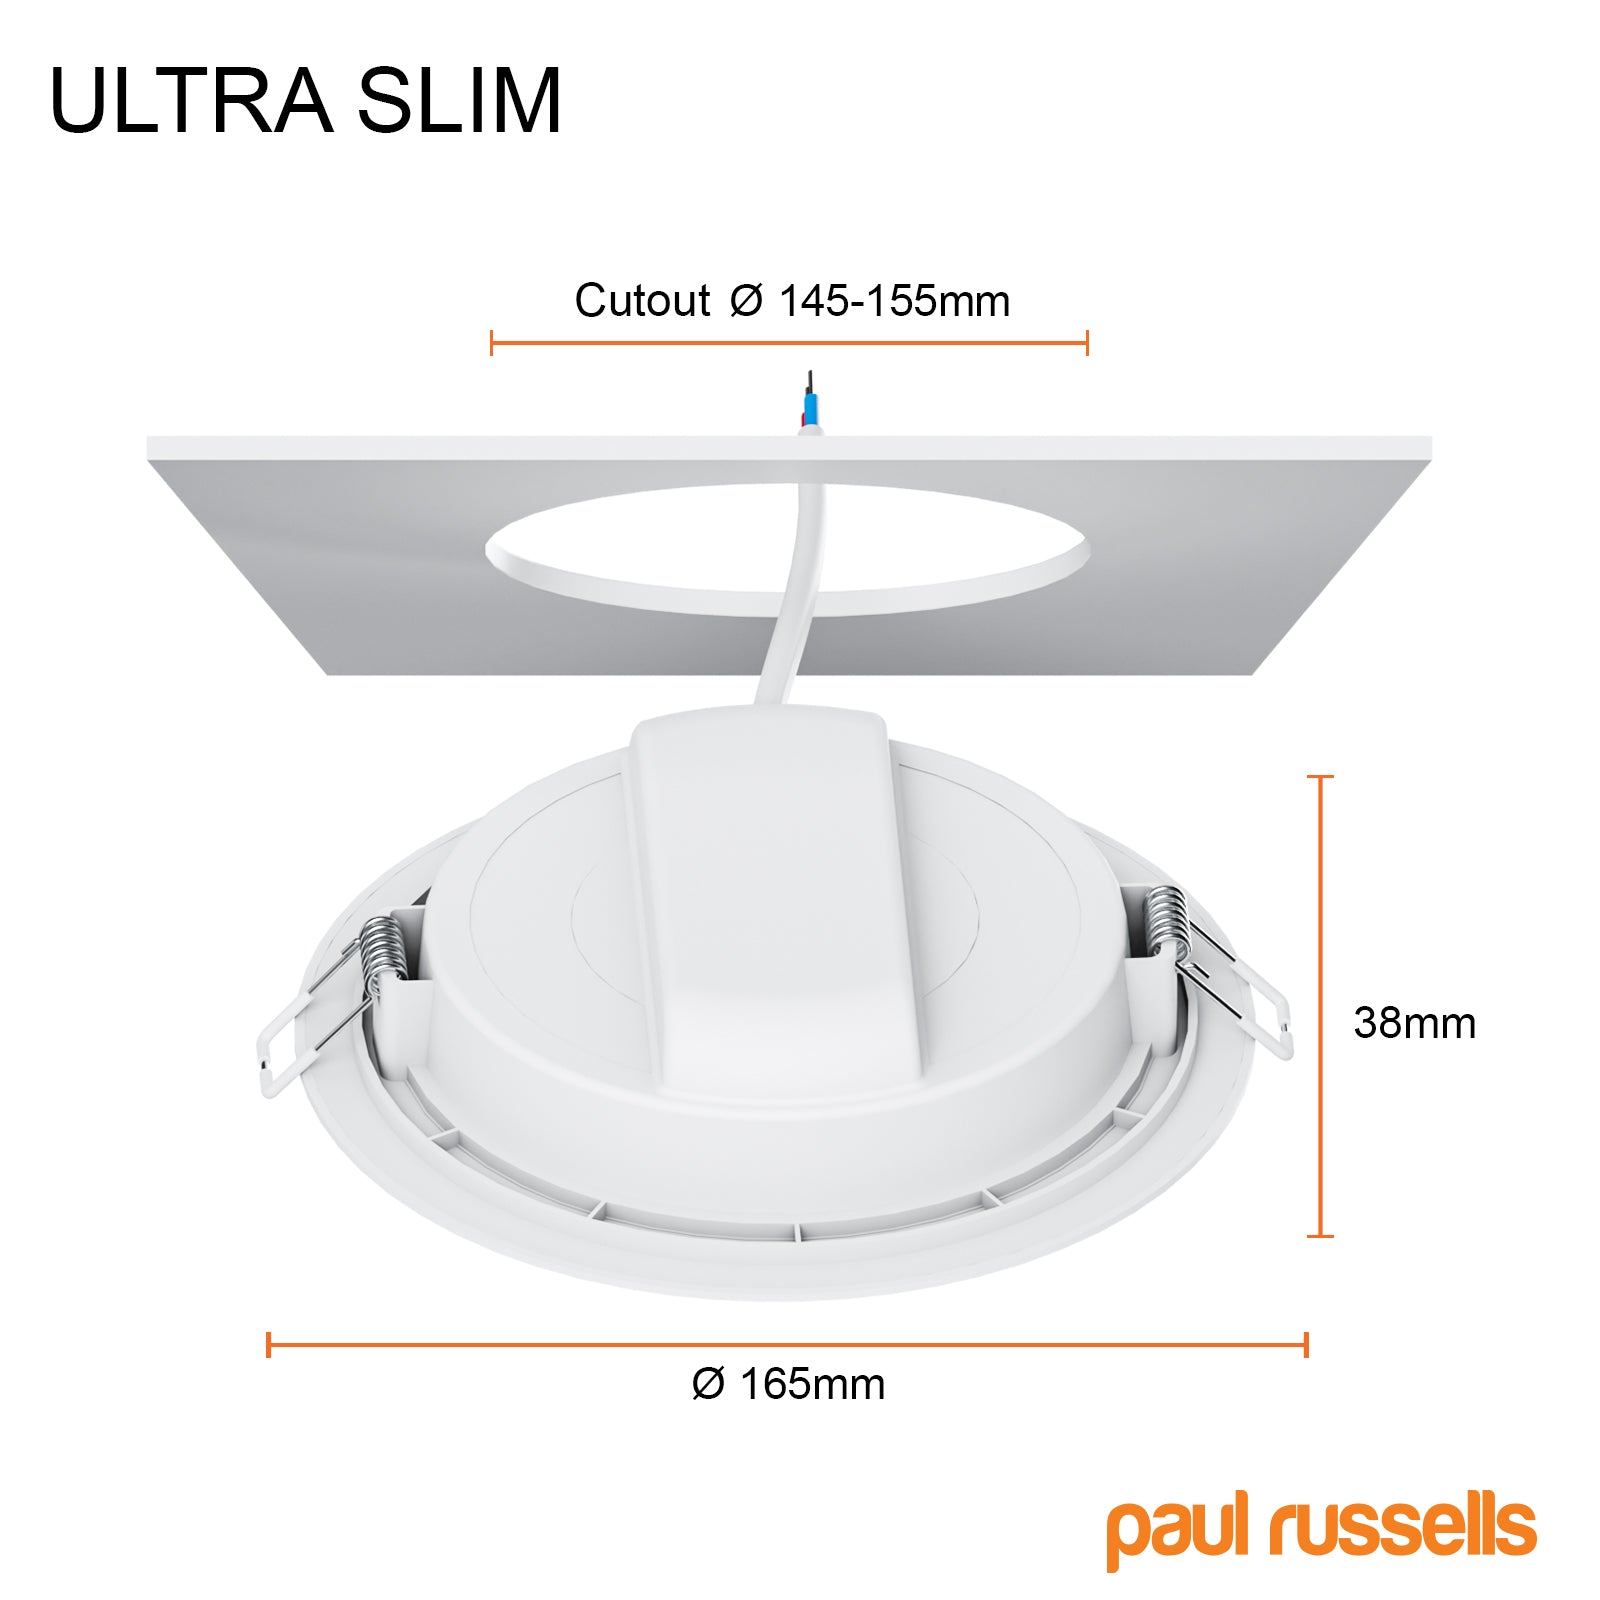 16W, LED Round Ceiling Downlights, 1600 Lumens, 6500K Day Light, Non-Dimmable Panel Spotlights